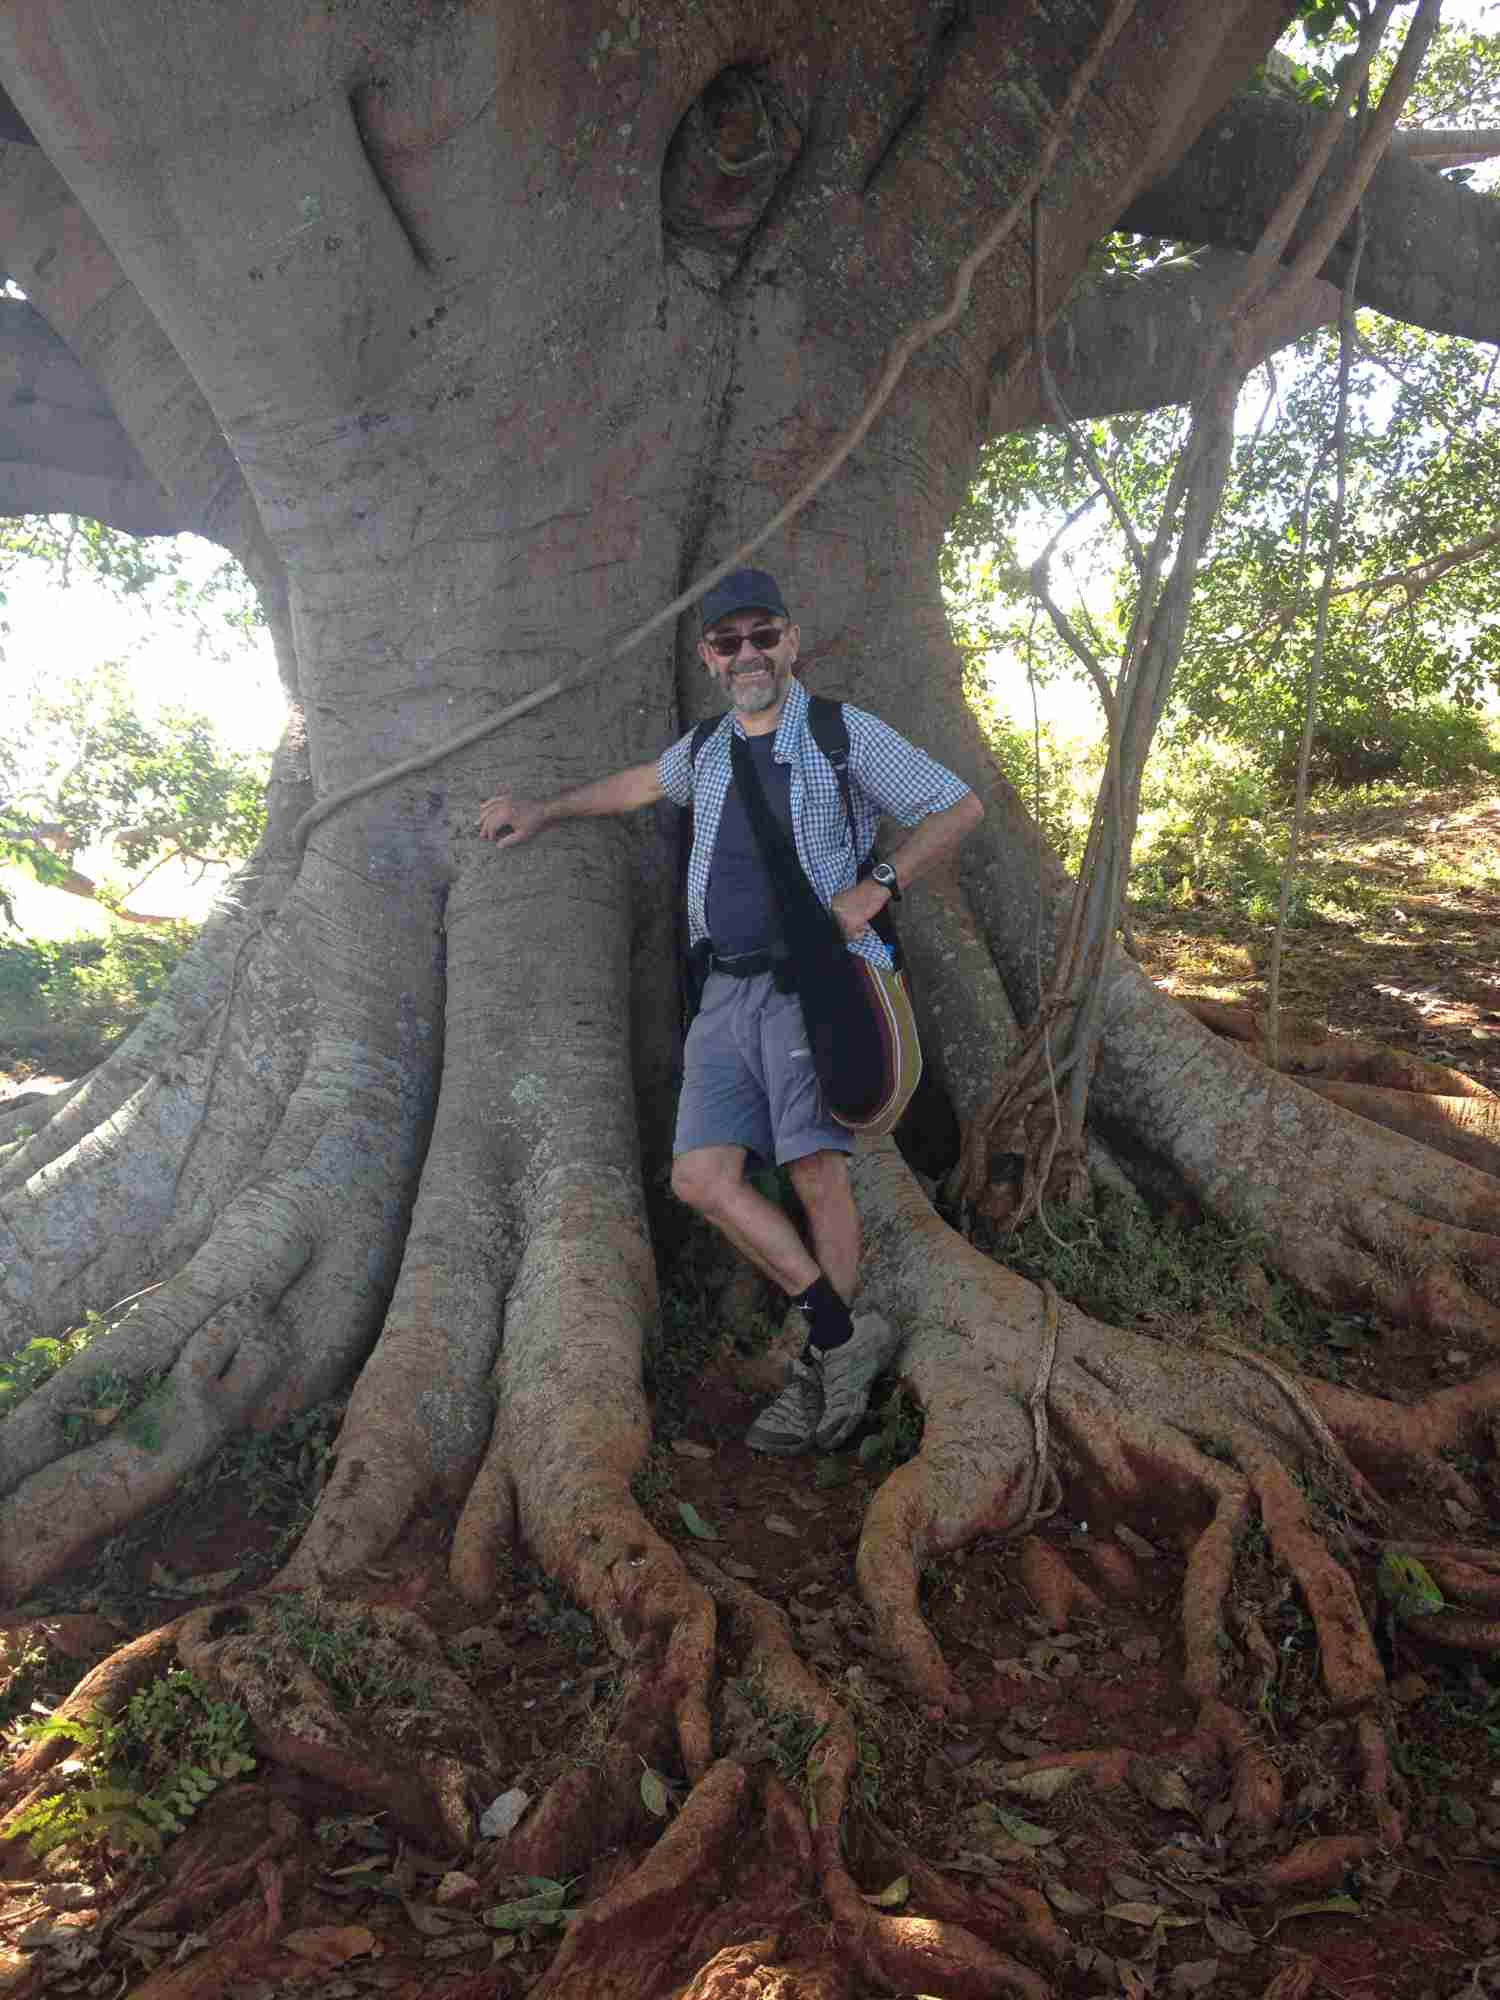 Huge trees and me